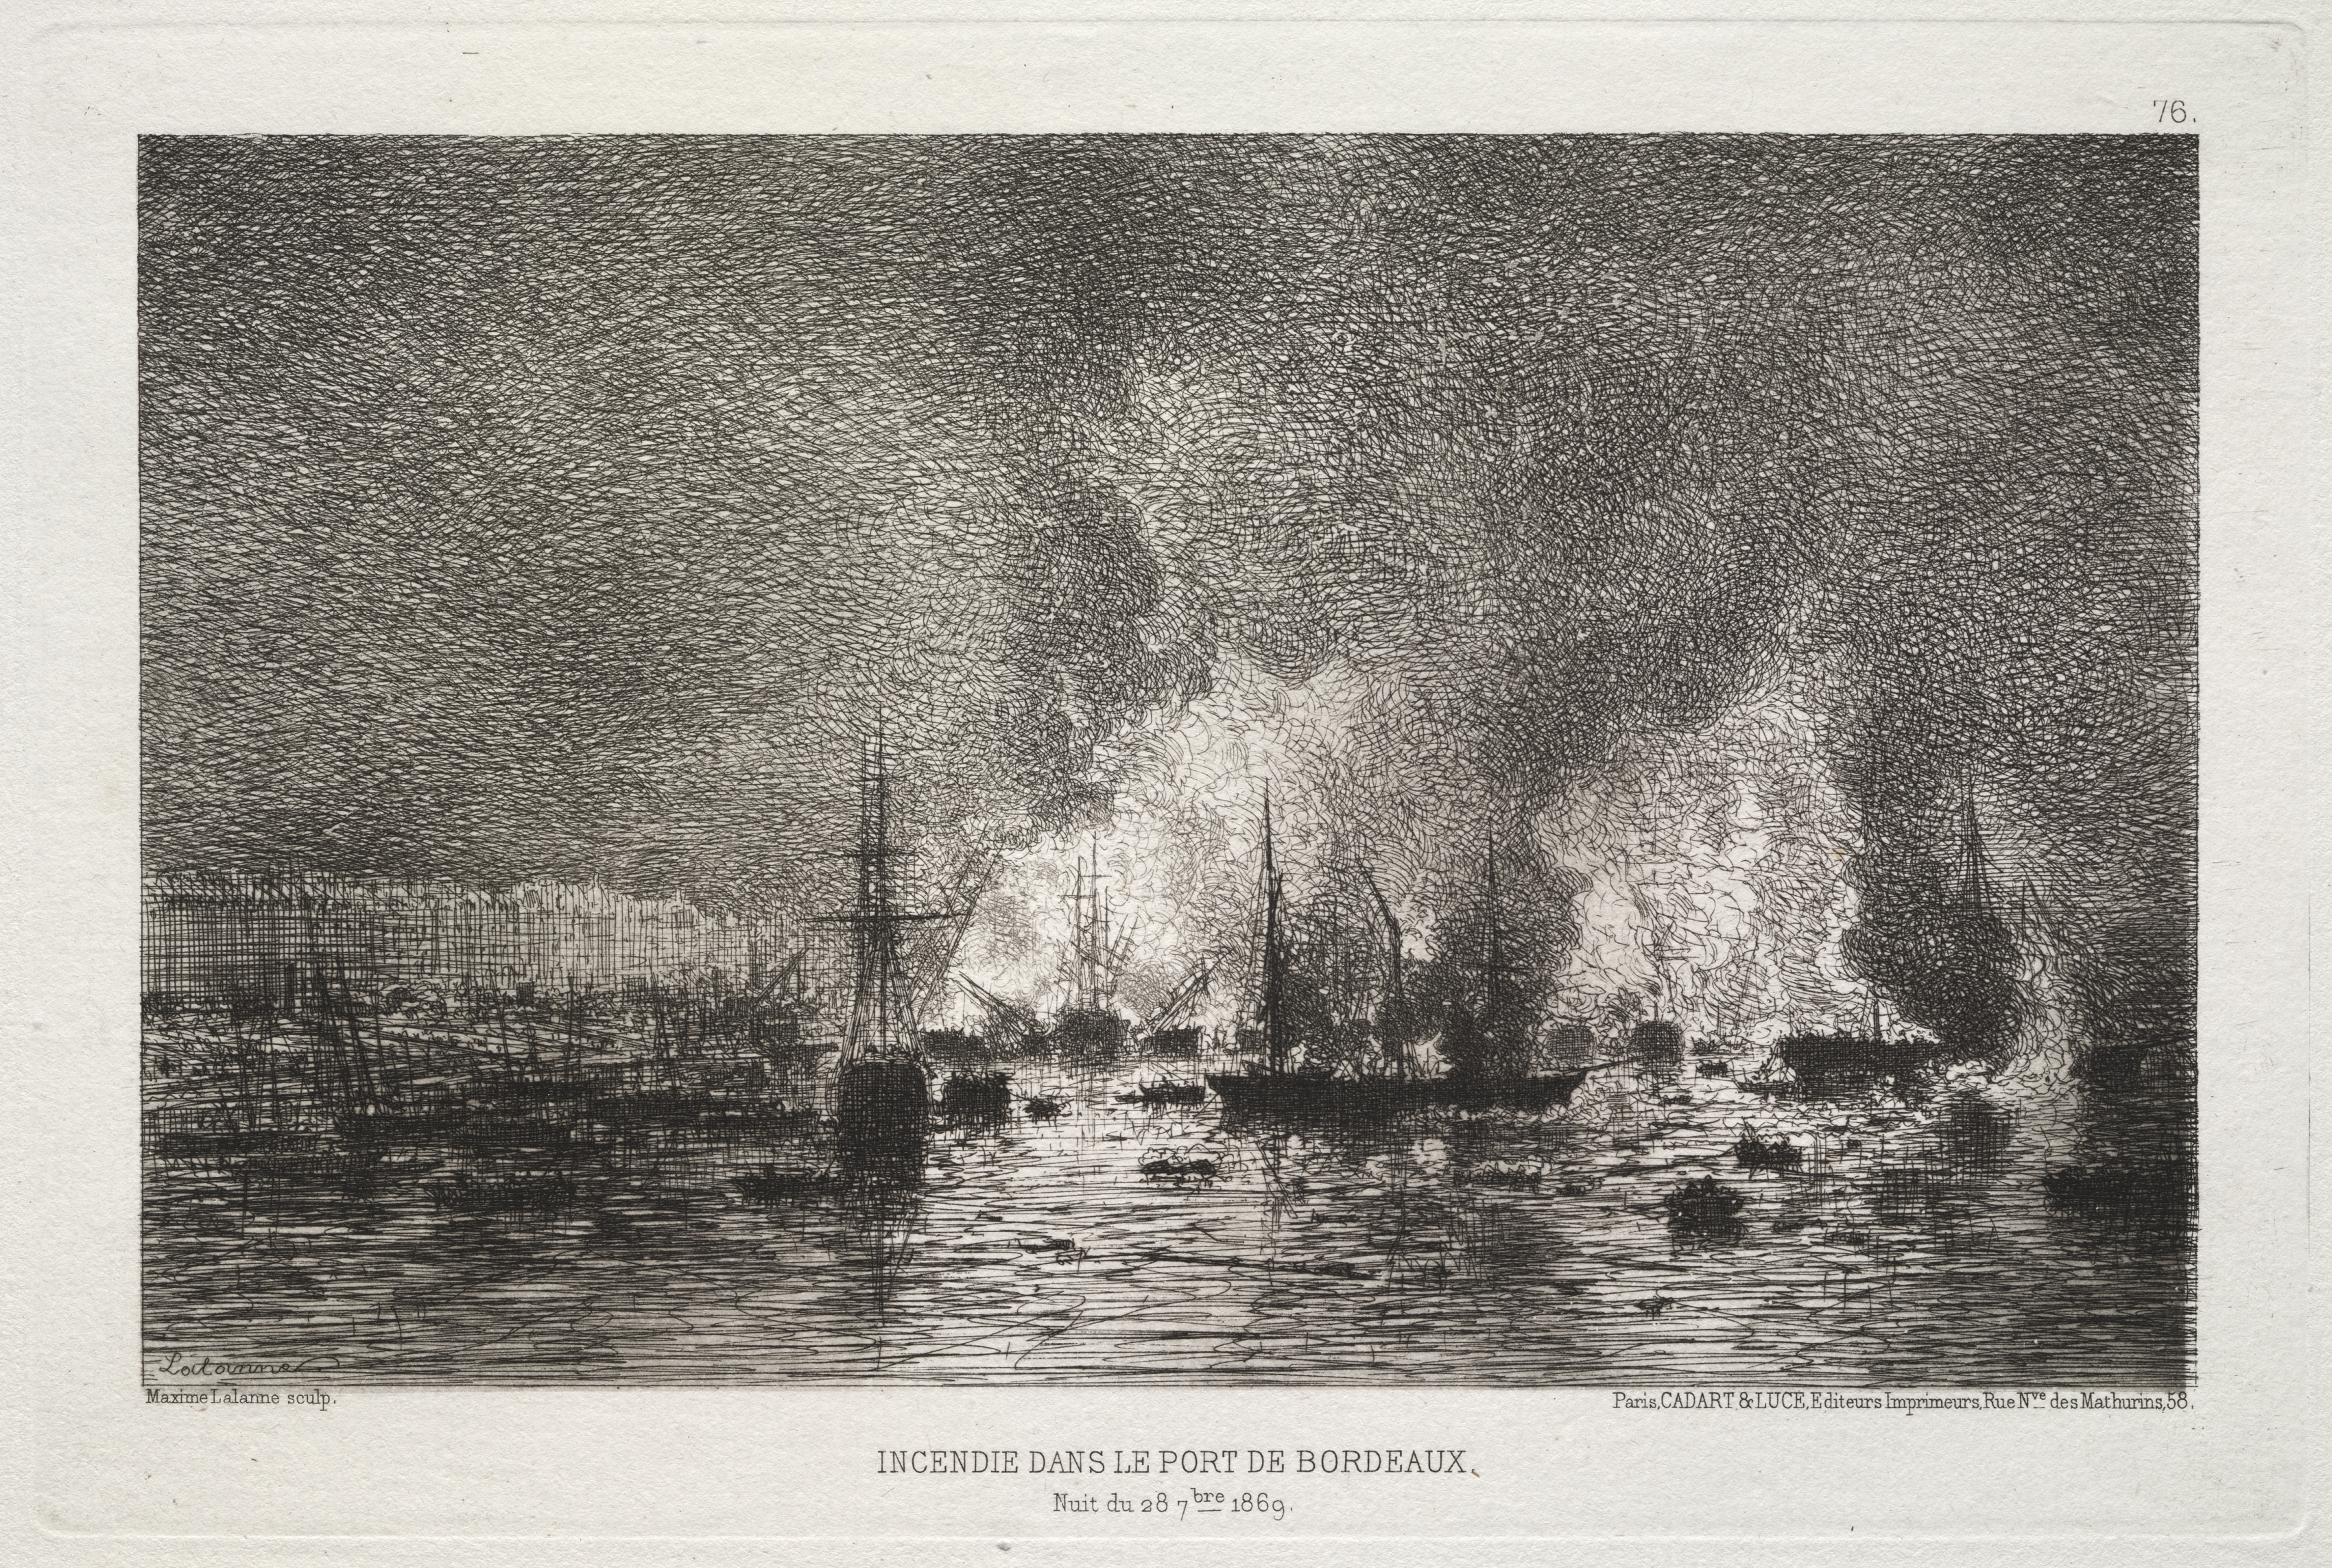 Conflagration in the Port of Bordeaux